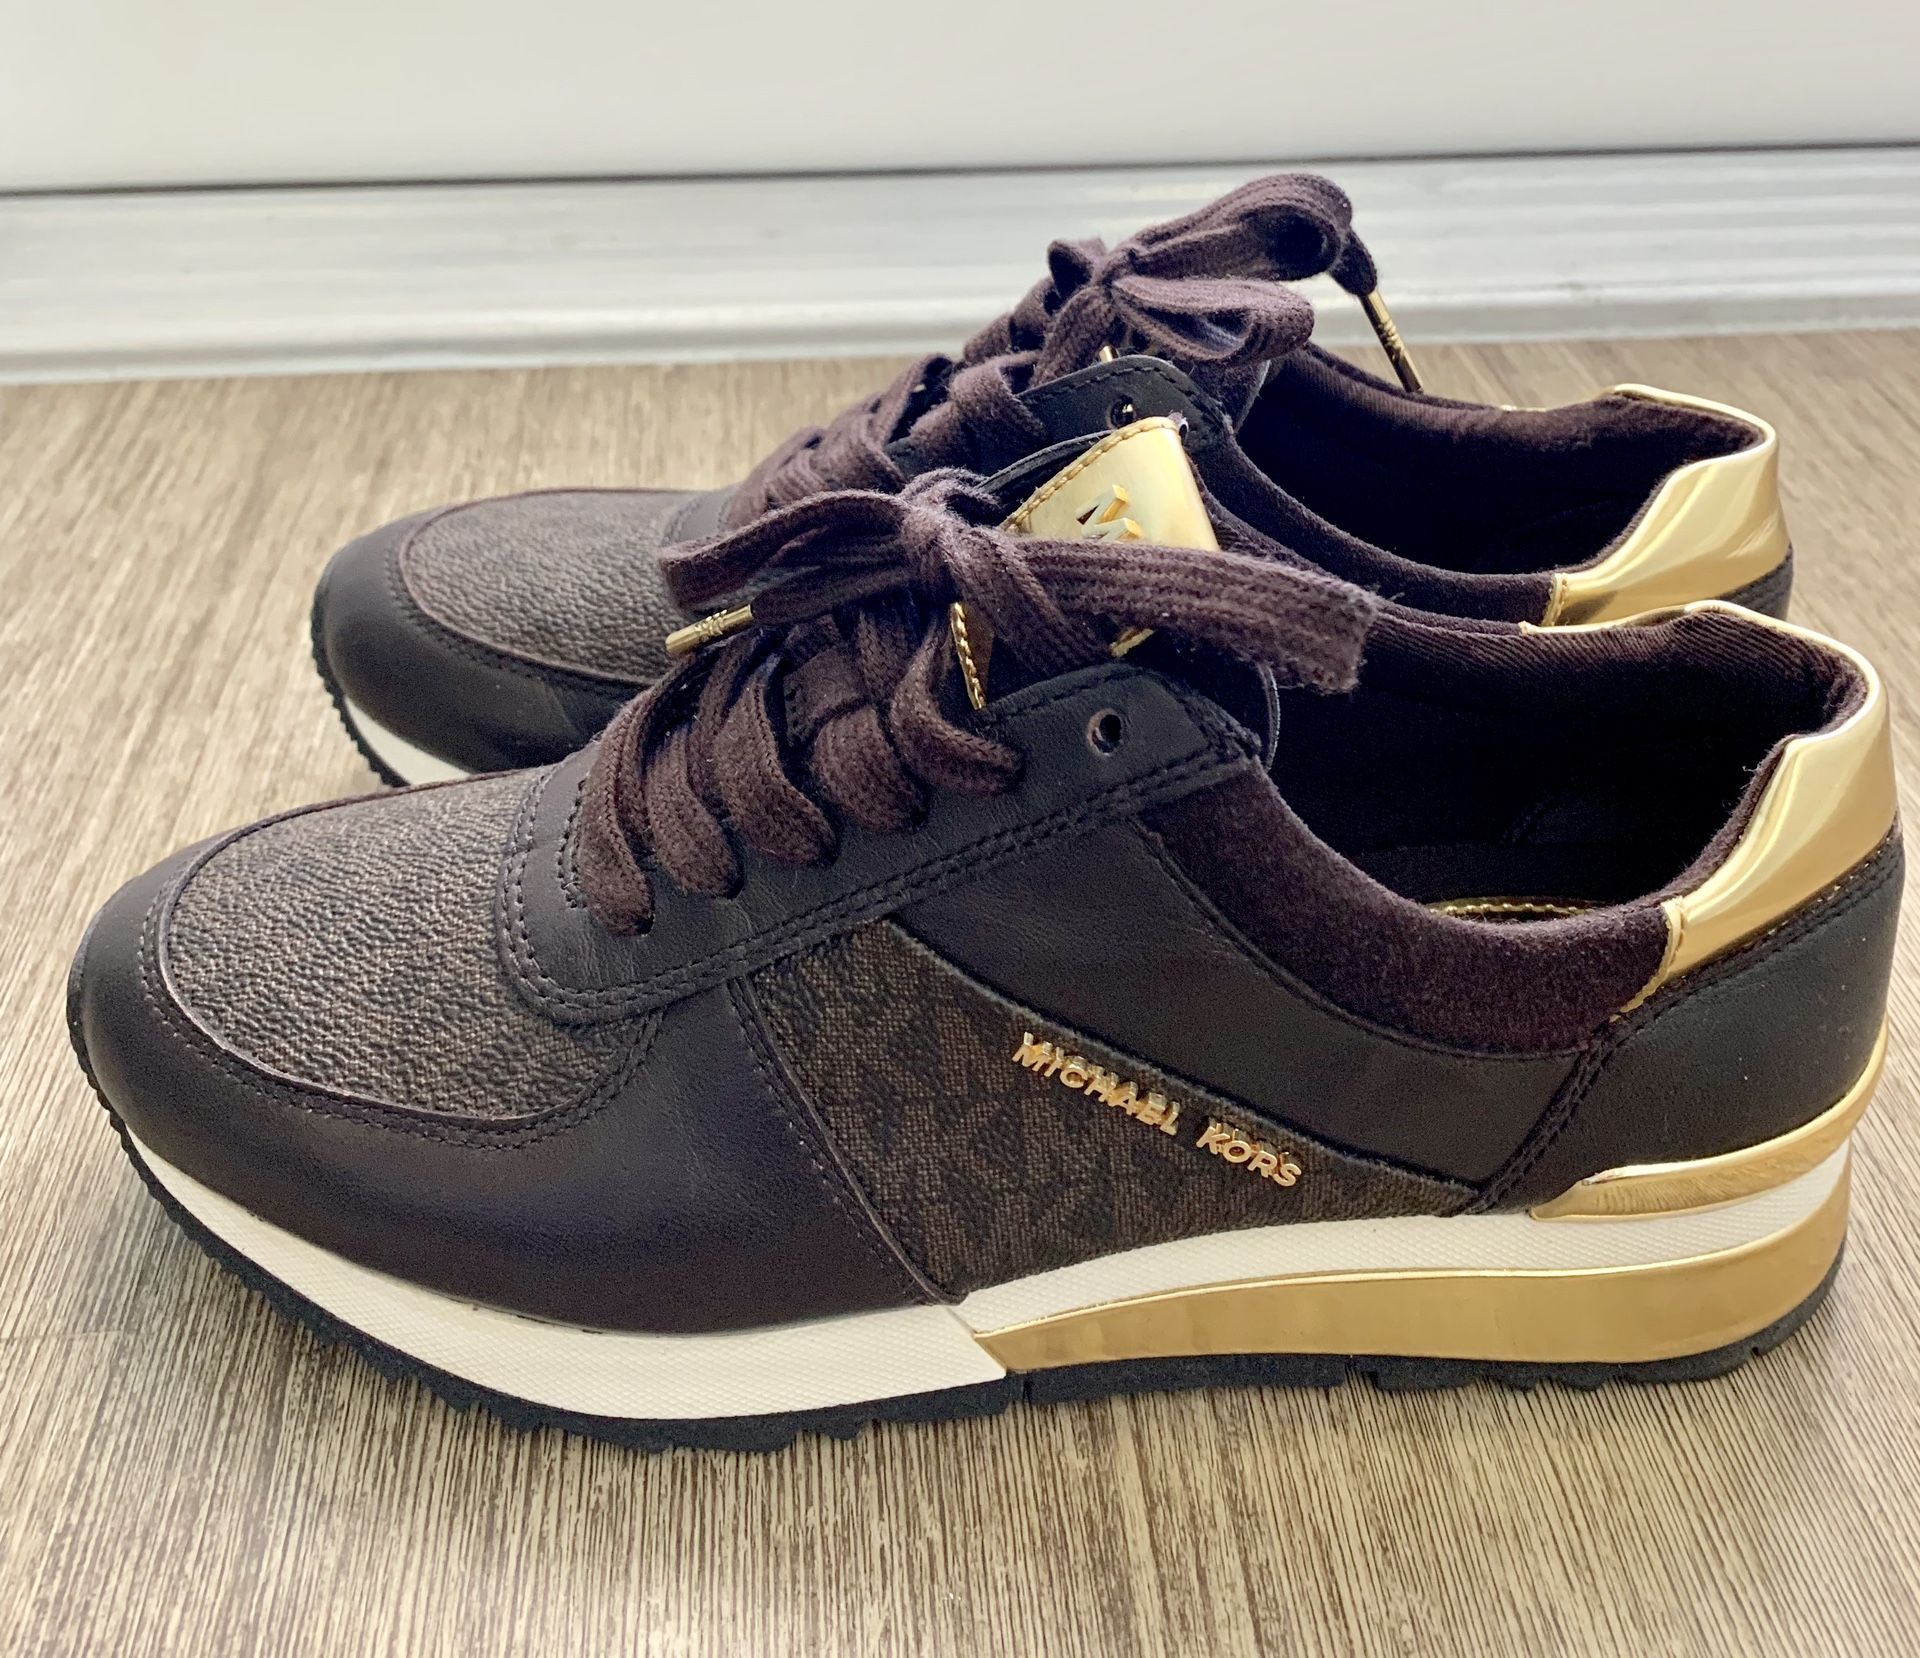 Michael Kors Allie leather trainer sneakers